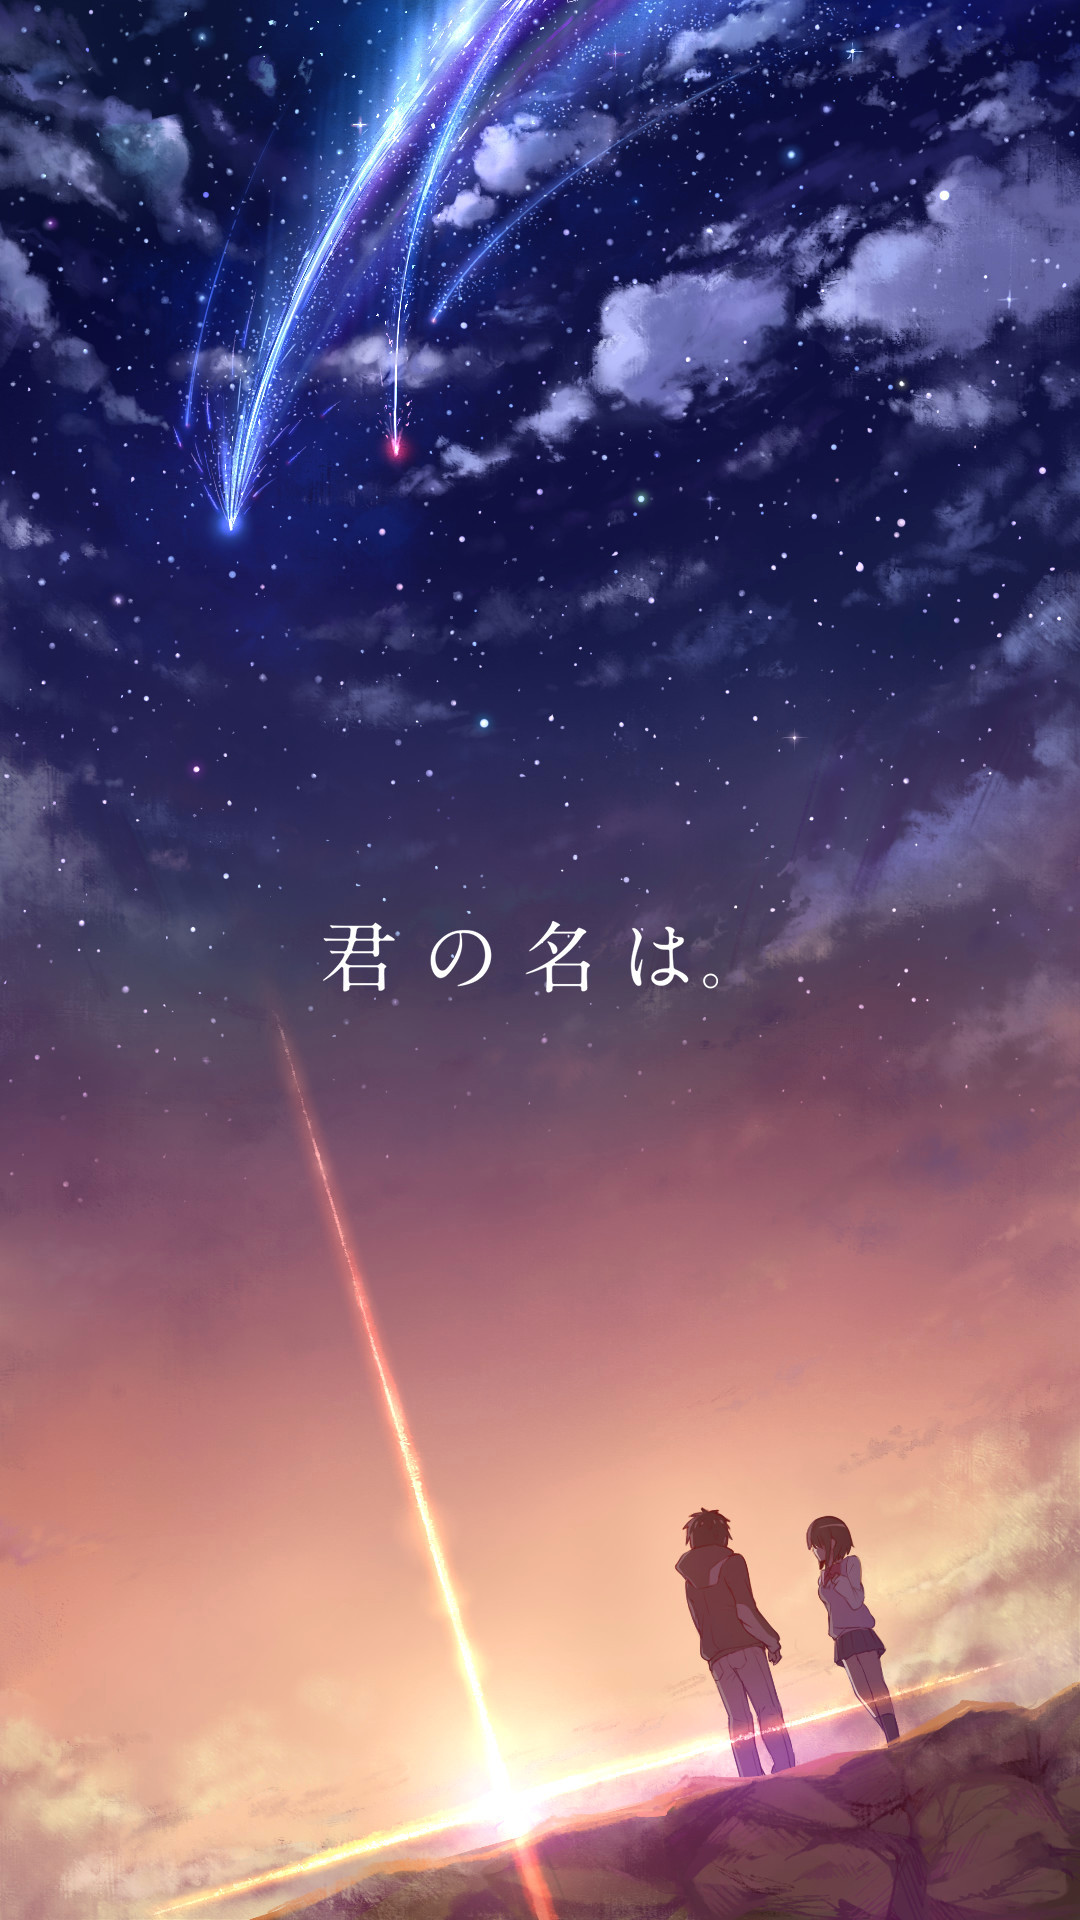 1080x1920, Iphone 8 Wallpapers Anime Inspirational - Your Name Wallpaper Live - HD Wallpaper 